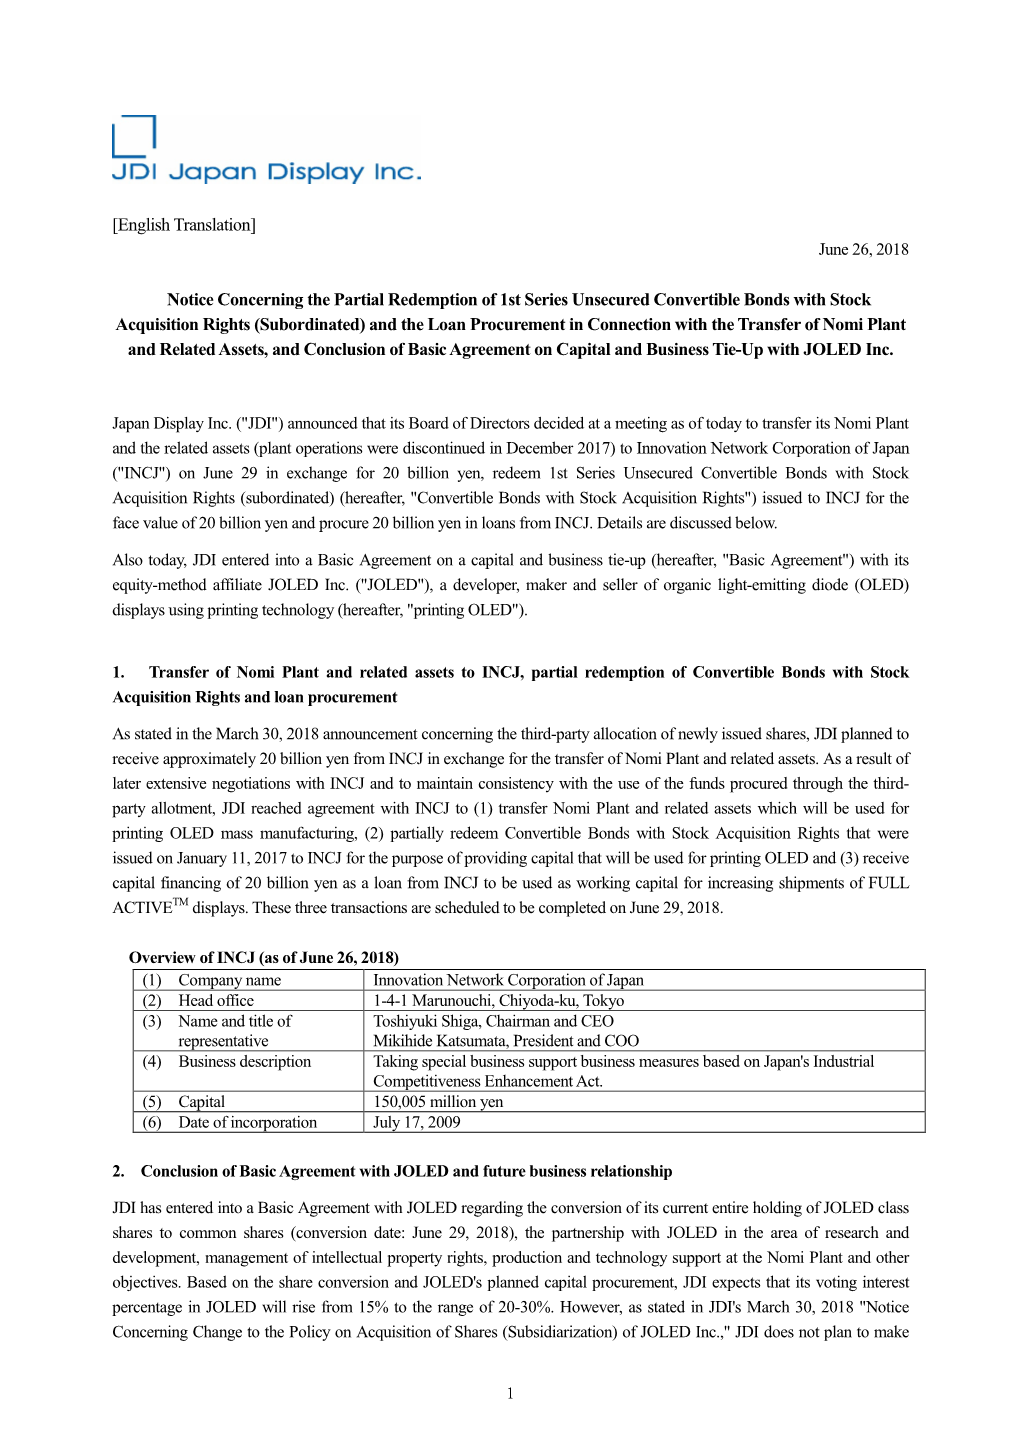 [English Translation] Notice Concerning the Partial Redemption of 1St Series Unsecured Convertible Bonds with Stock Acquisition